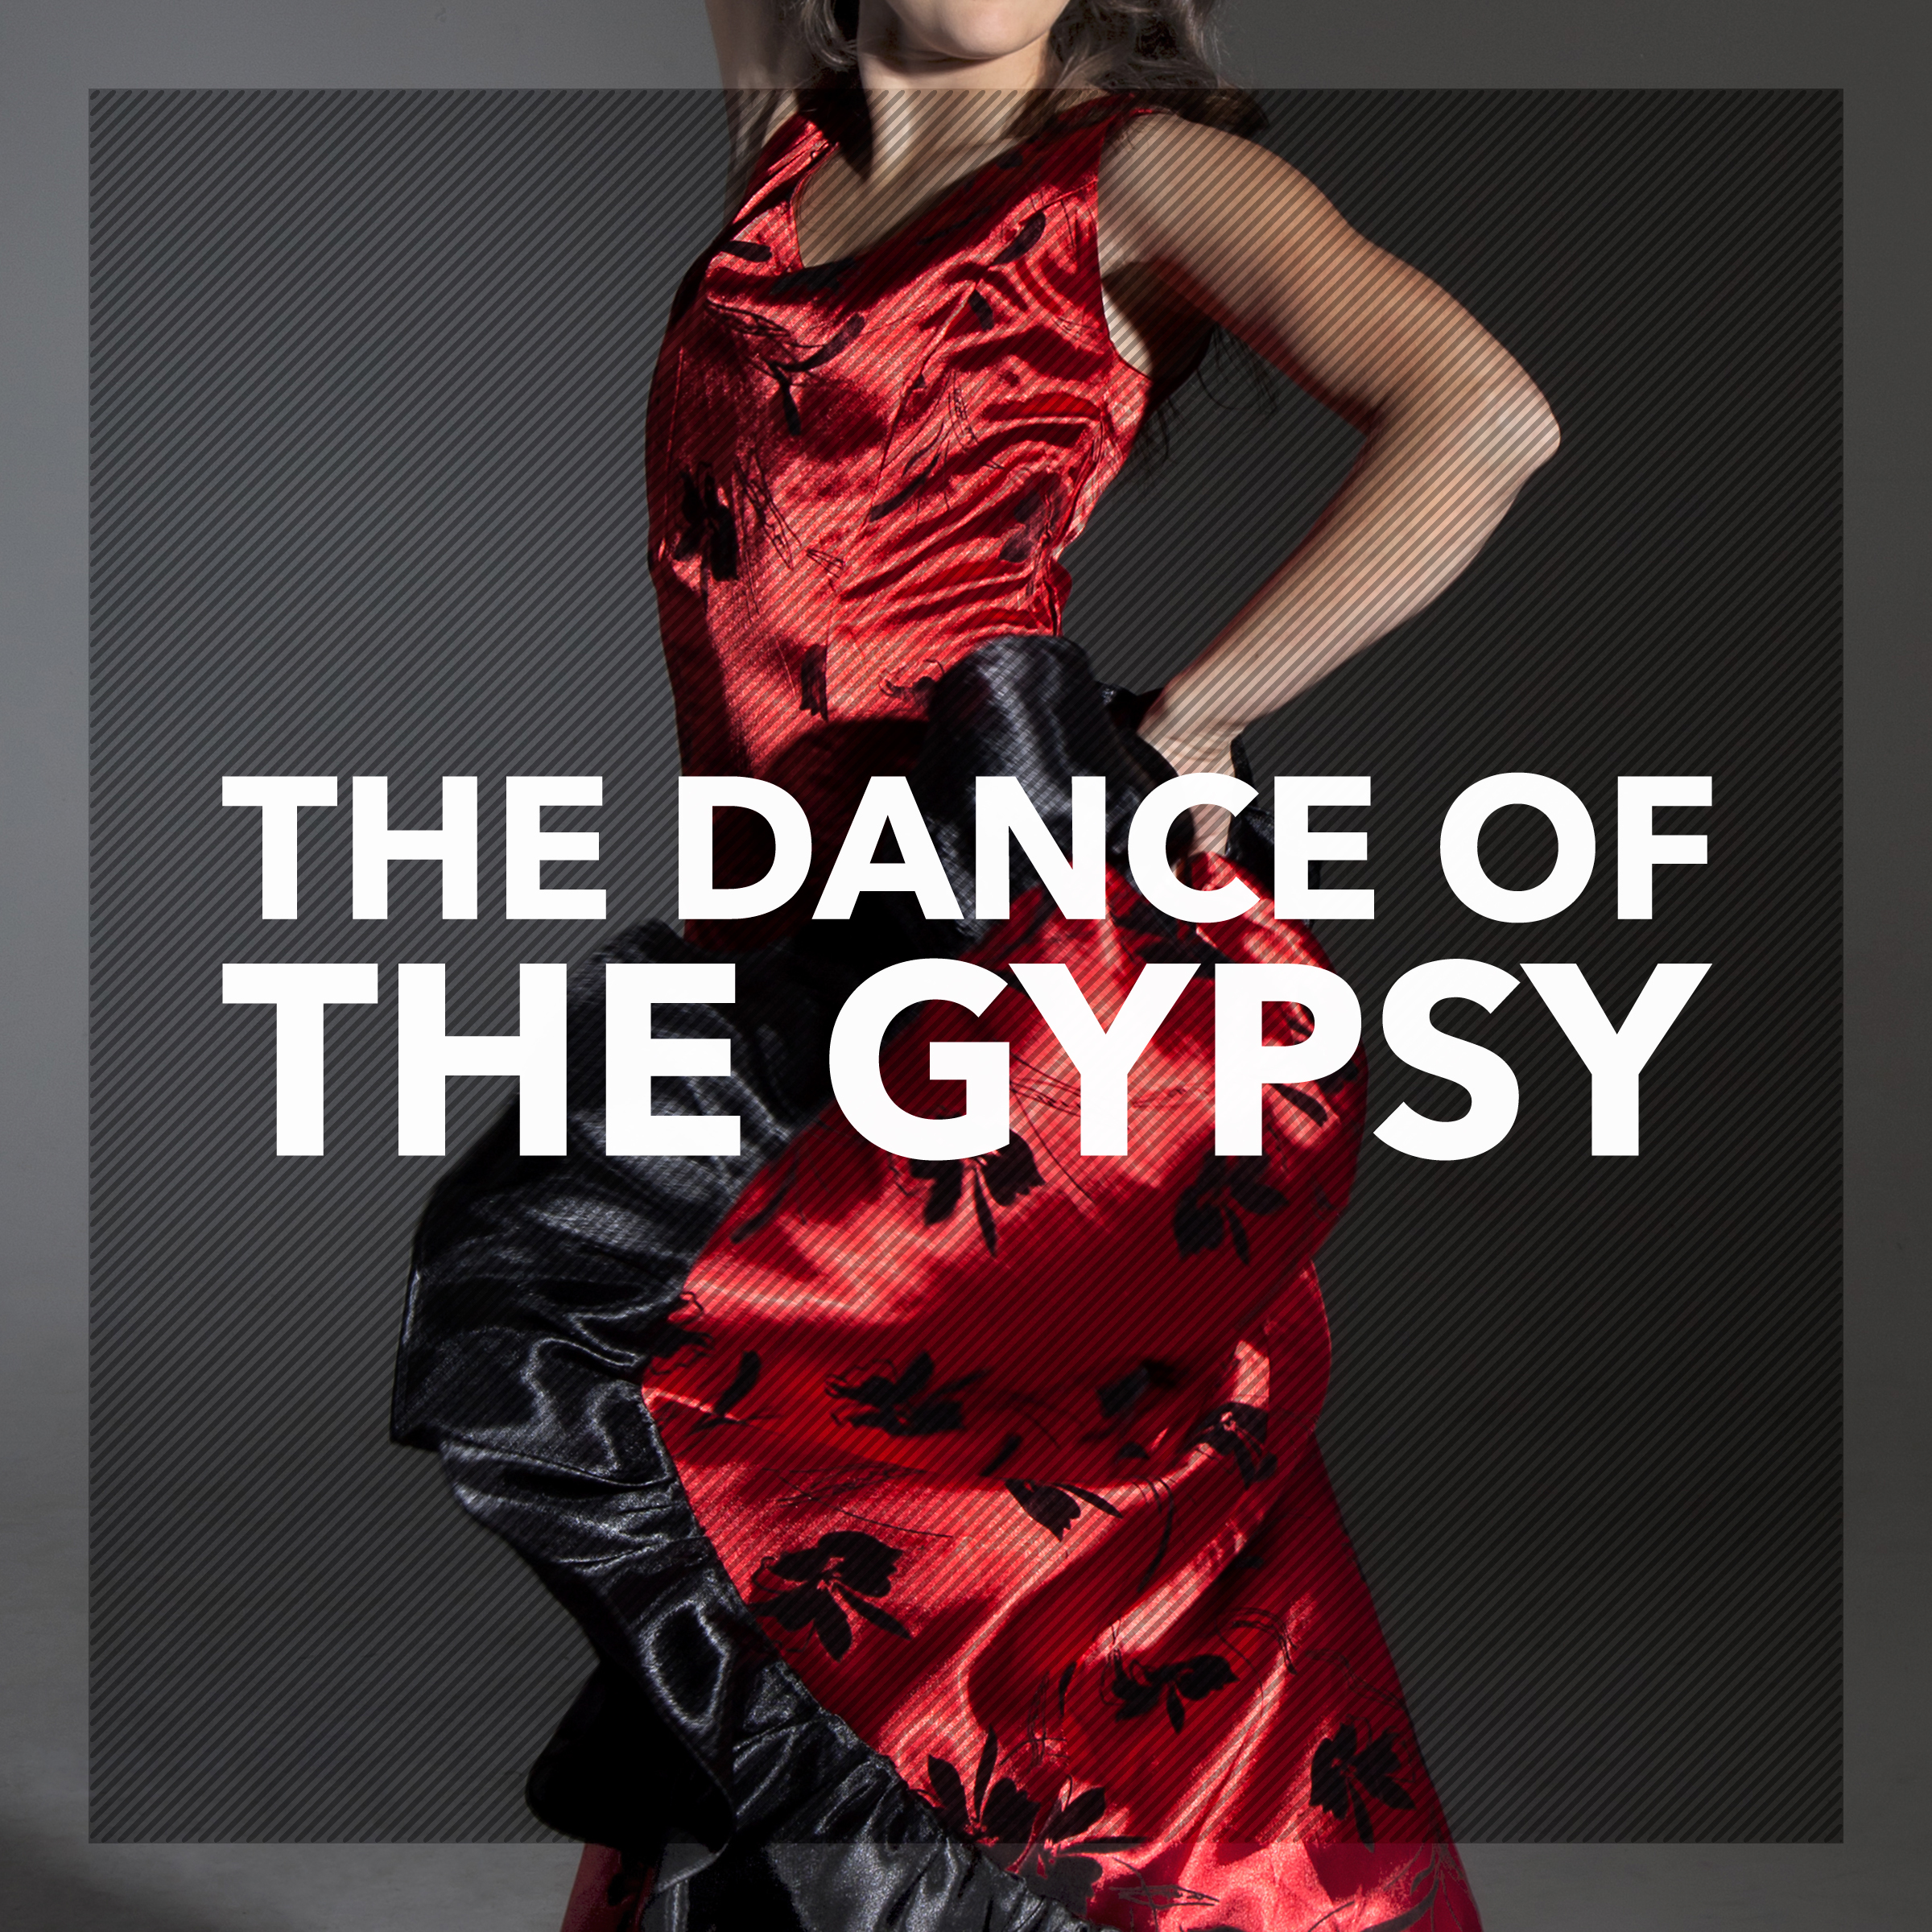 The Dance of the Gypsy